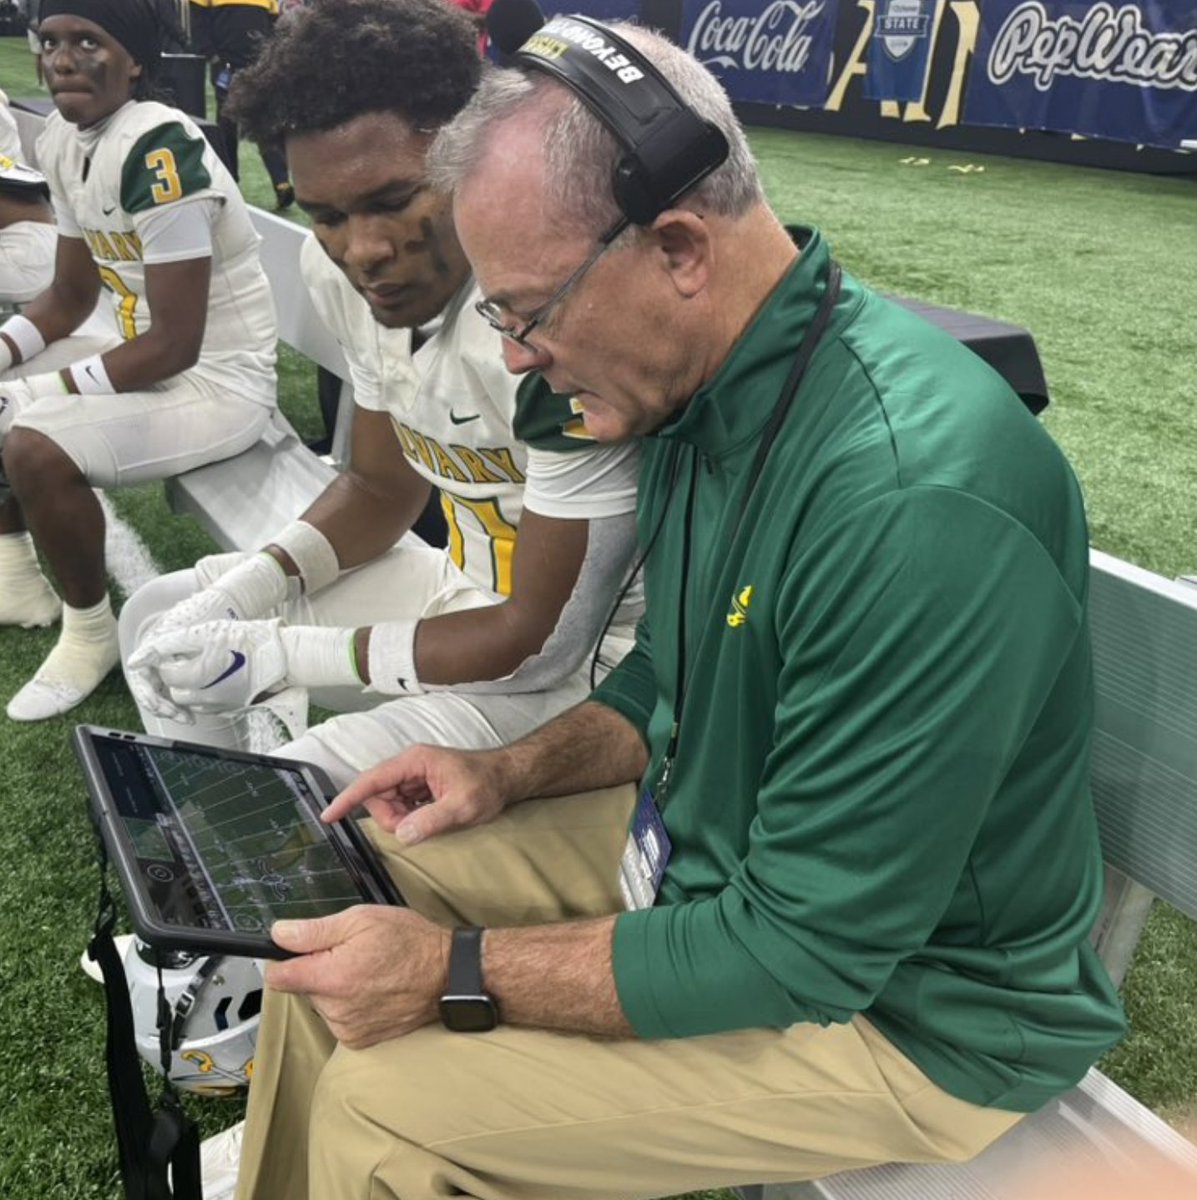 State champs Calvary Baptist has been a SkyCoach customer since 2013. We spoke to the Cavaliers about using our sideline replay system. “The simplicity of it. SkyCoach is simple to hook up. ... If a team doesn’t have SkyCoach, they’re missing out.” 🤝 🏈 ow.ly/Oij050R16vU